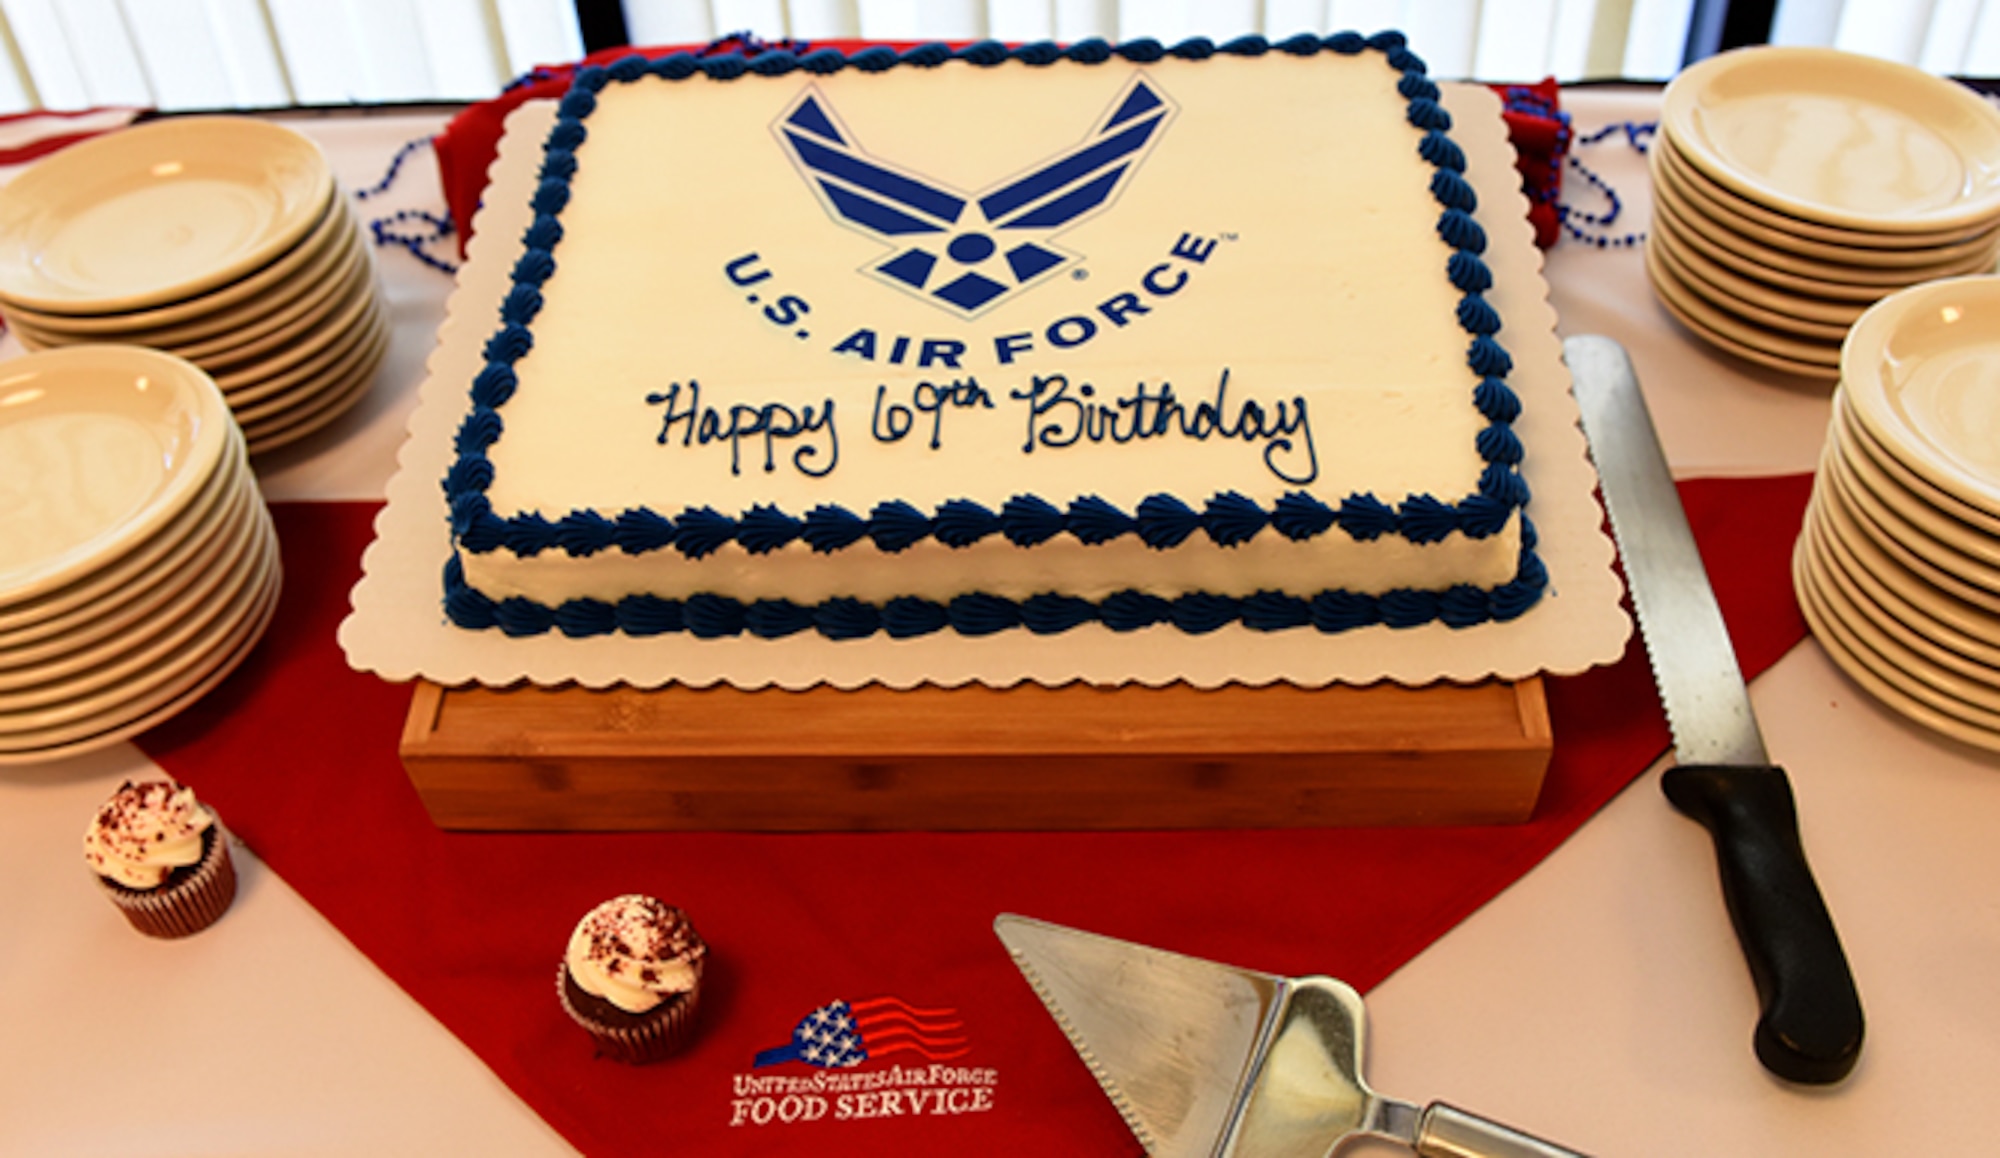 This birthday cake was part of a ceremony held at the Warrior Inn Dining Facility Sept. 13, 2016, at Fairchild Air Force Base. The base celebrated the United States Air Force's 69th birthday this week with several ceremonies. (U.S. Air Force photo/Airman 1st Class Ryan Lackey)